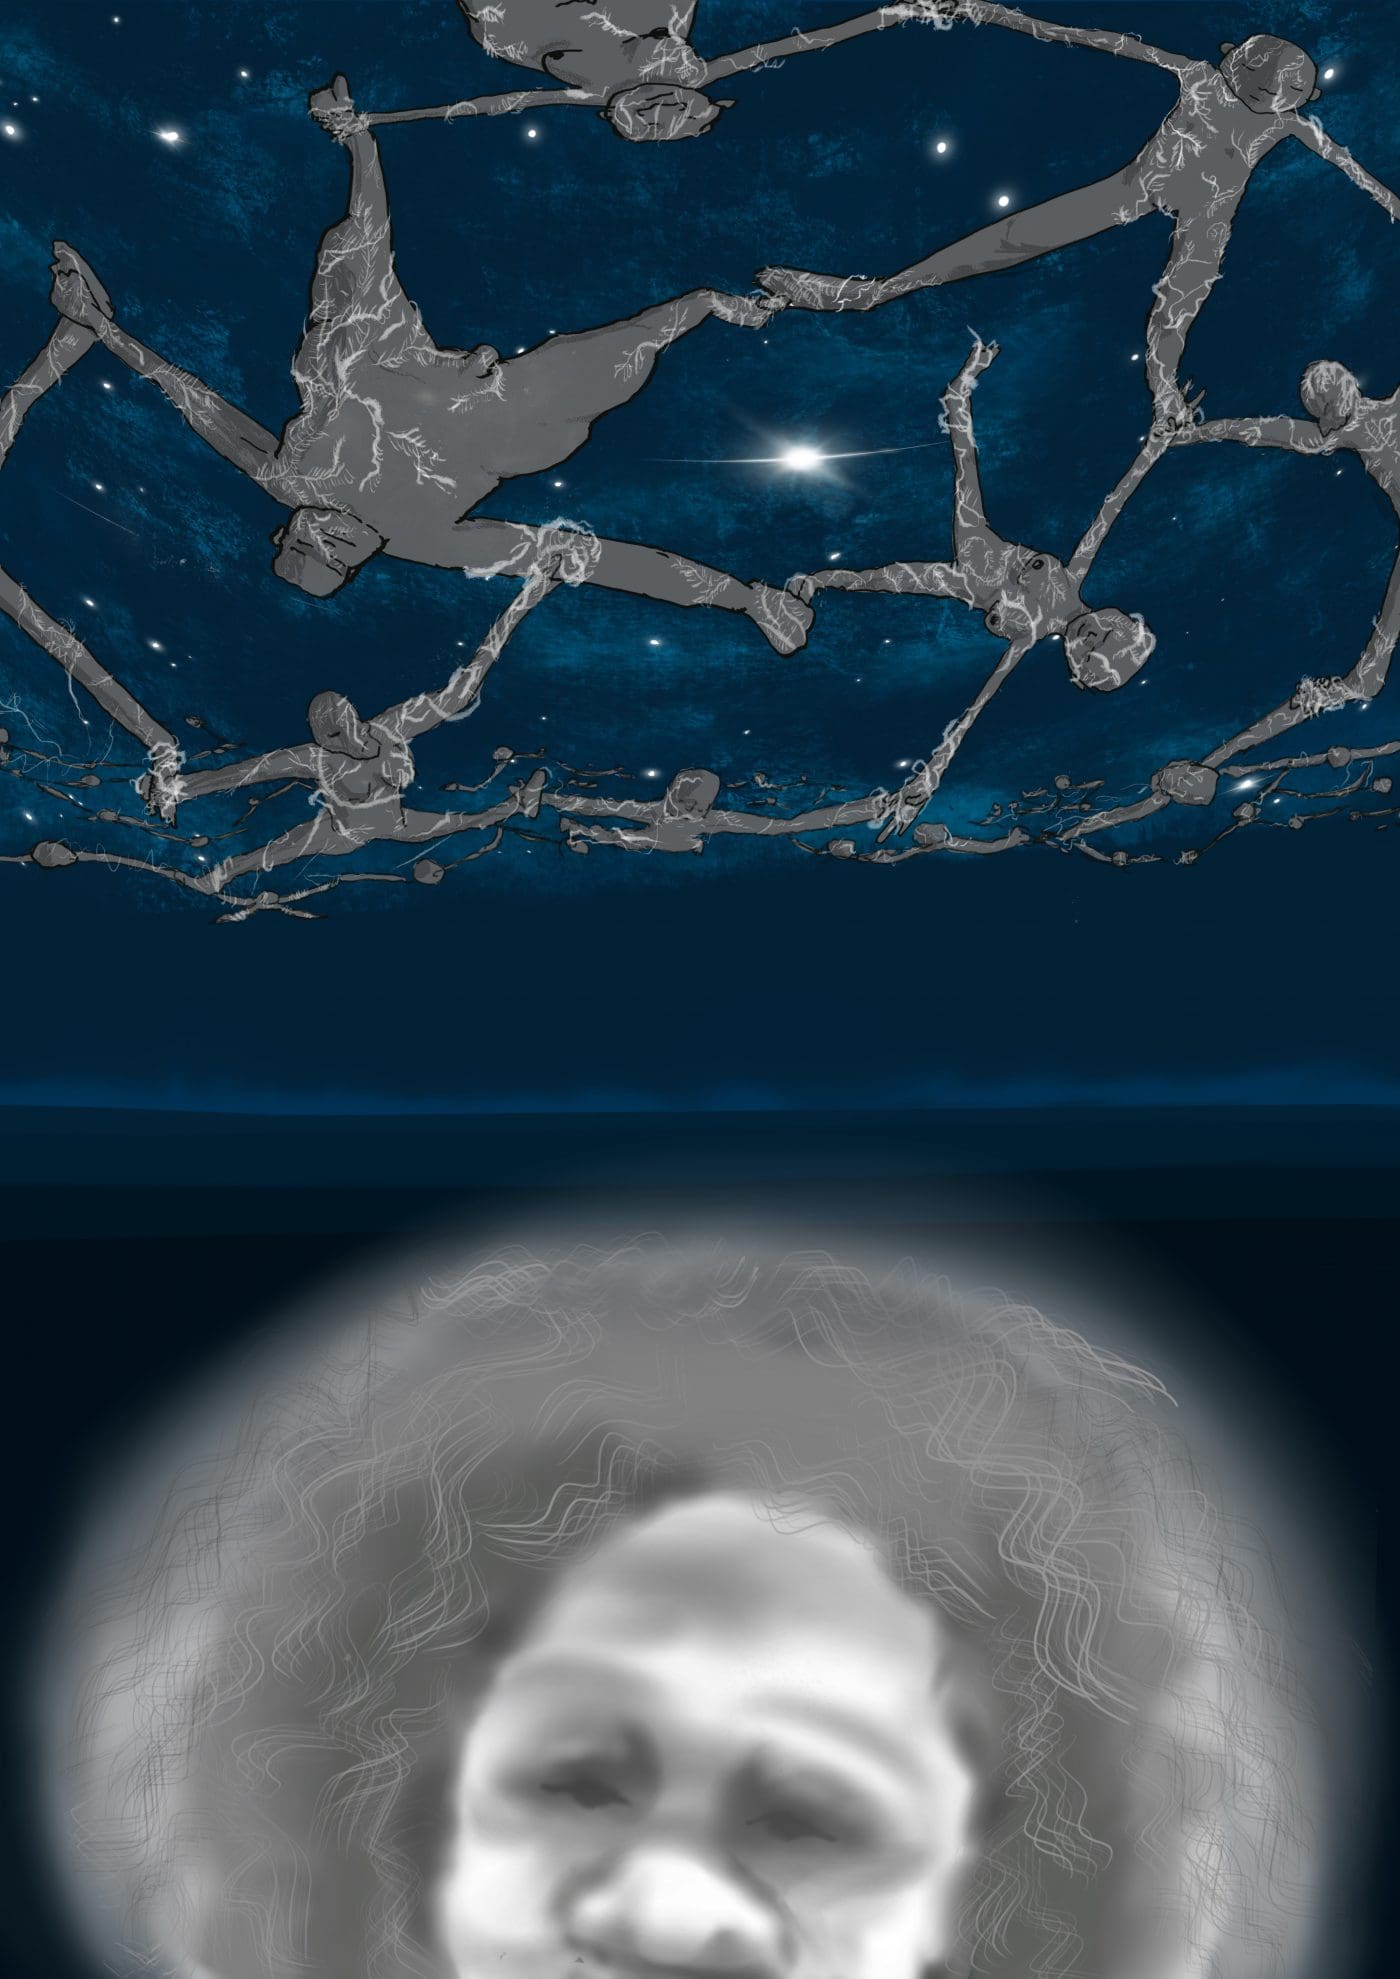 Image Description: AP1957 of the Ancient Ones appears in the foreground, the top half of the face of an Aboriginal woman with white face paint and curly ghostly grey hair. Above her, a network of naked hairless bodies spread across a starry night sky like a net, the white wispy hyphae of mycelium bonding to each body to the next, feeding off their bodies.